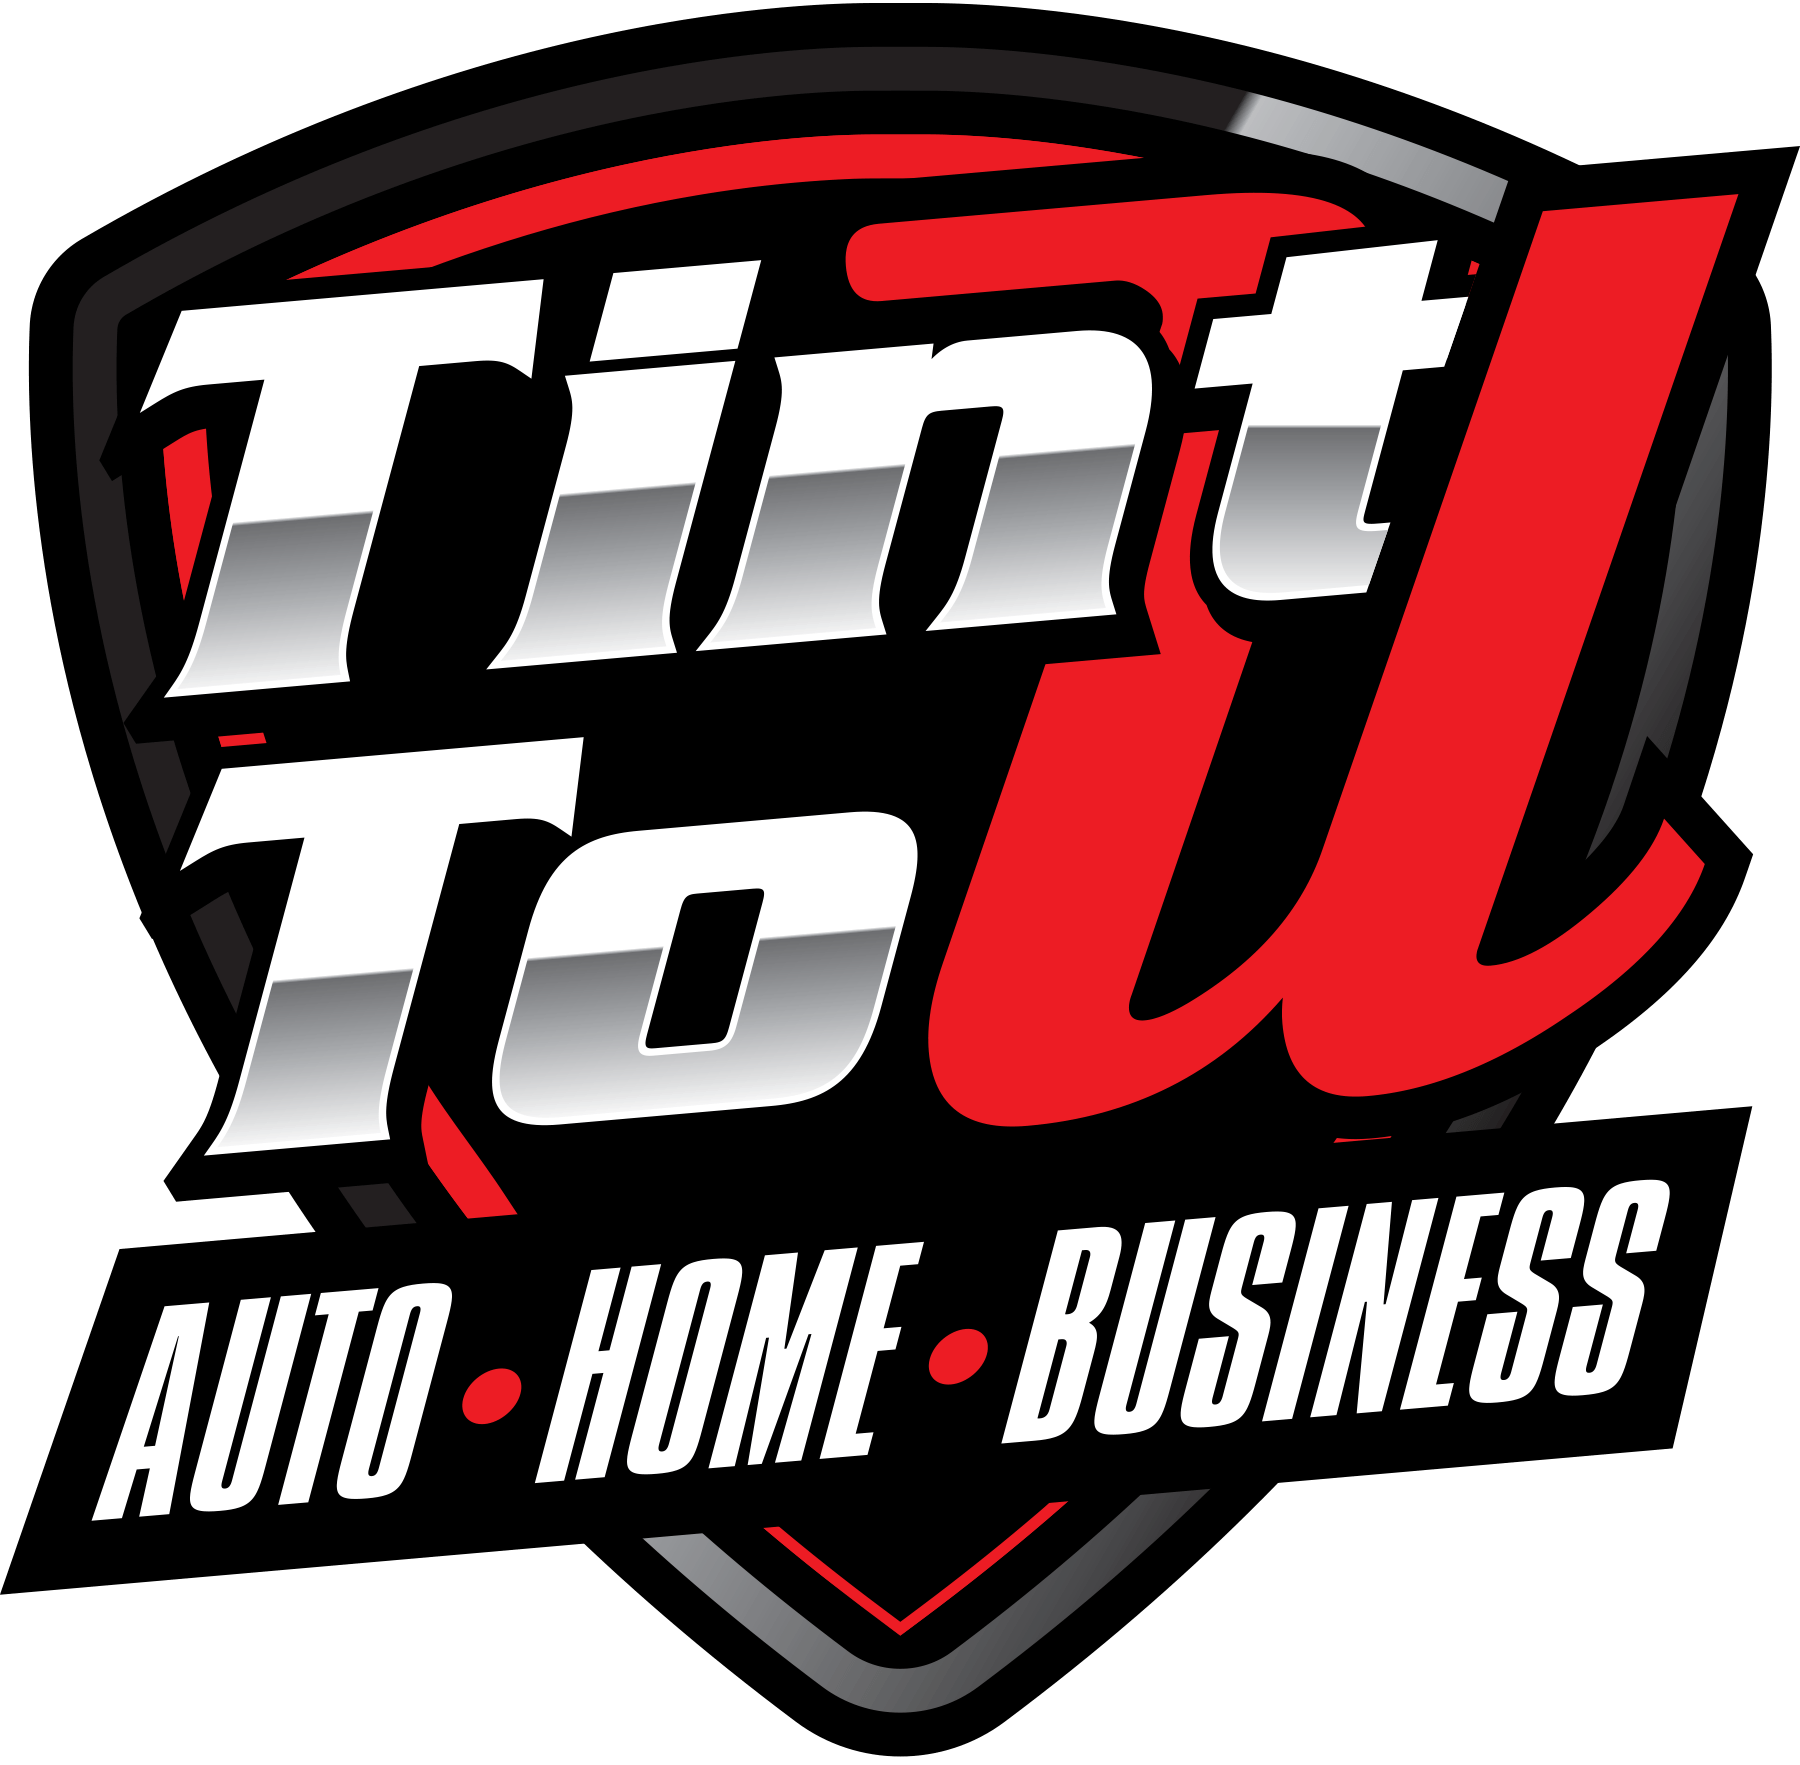 Top Car Window Tints For Heat Reduction—Car and Driver